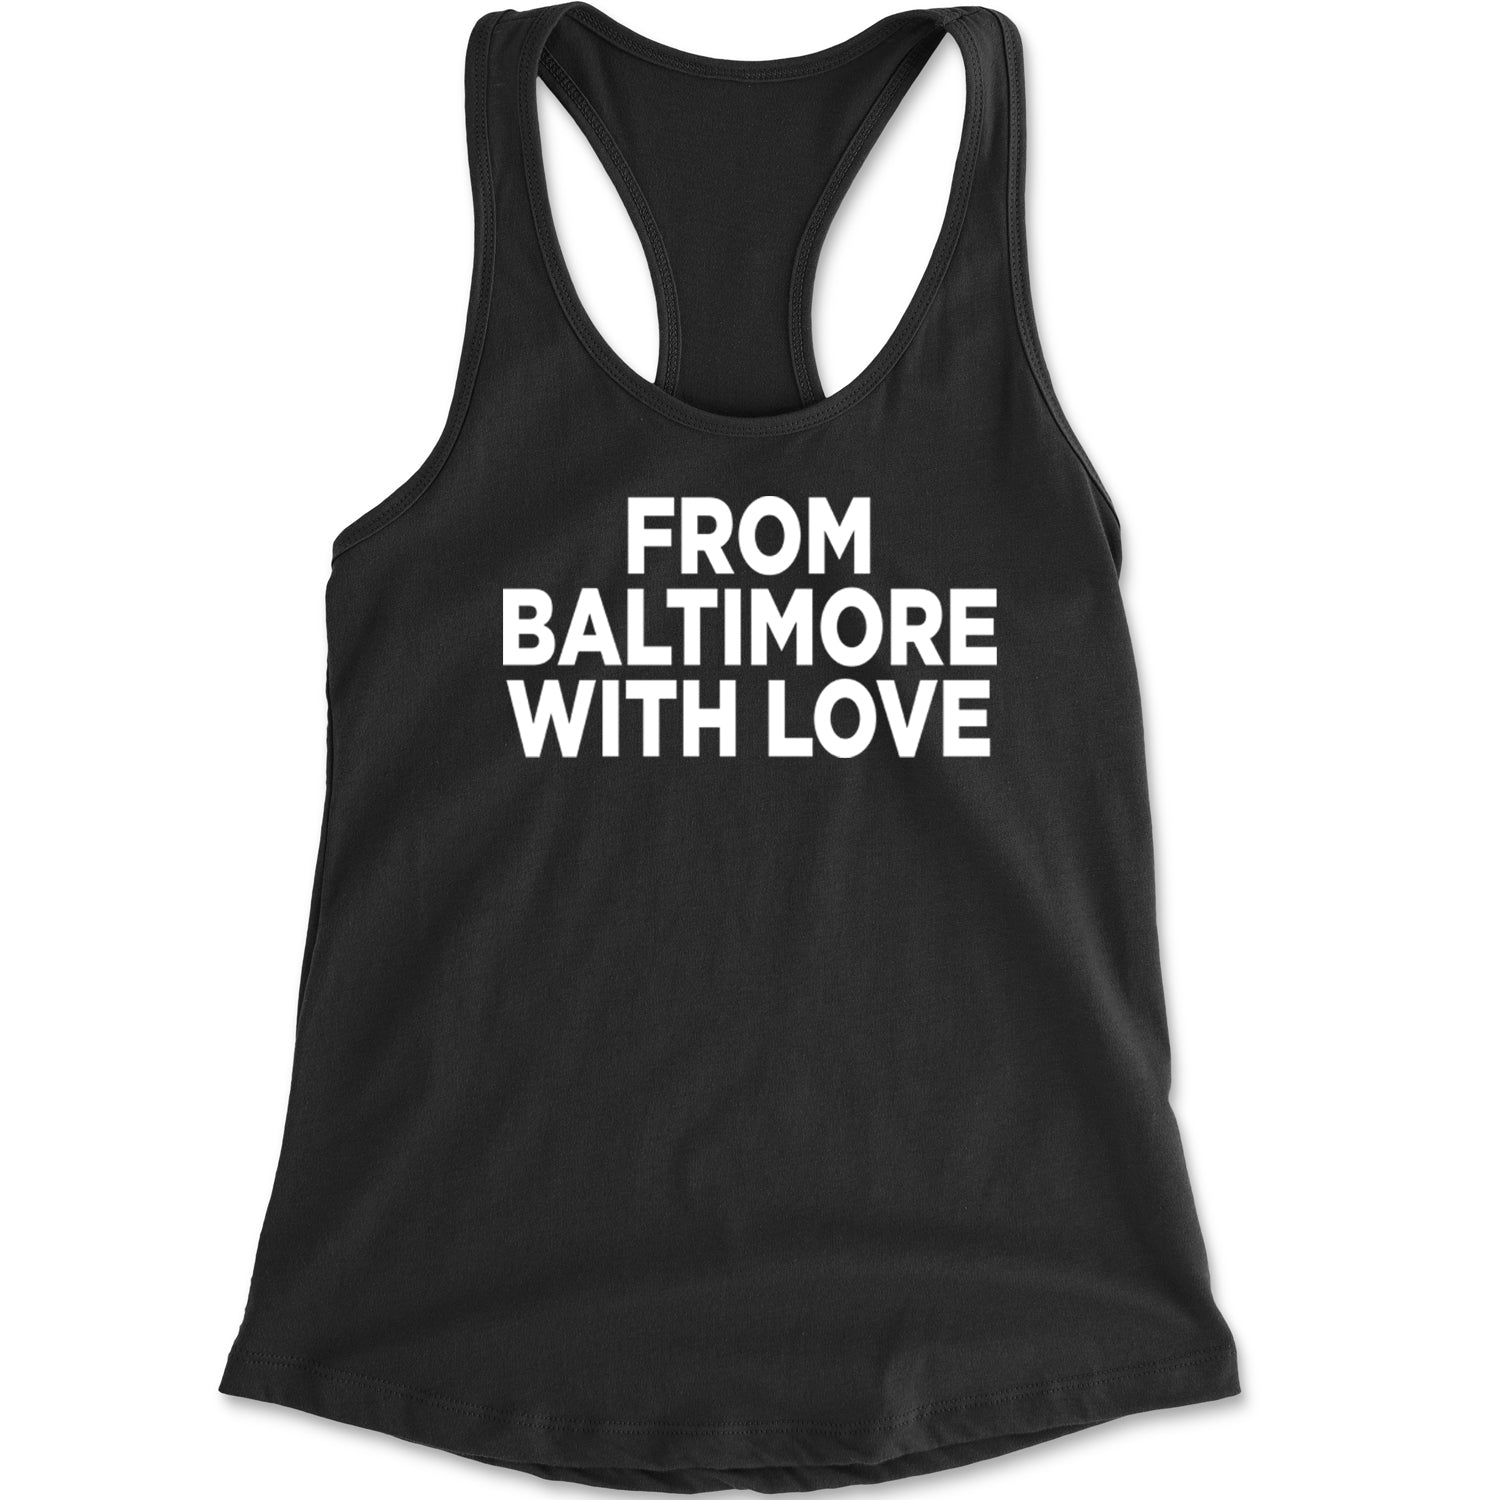 From Baltimore With Love Racerback Tank Top for Women